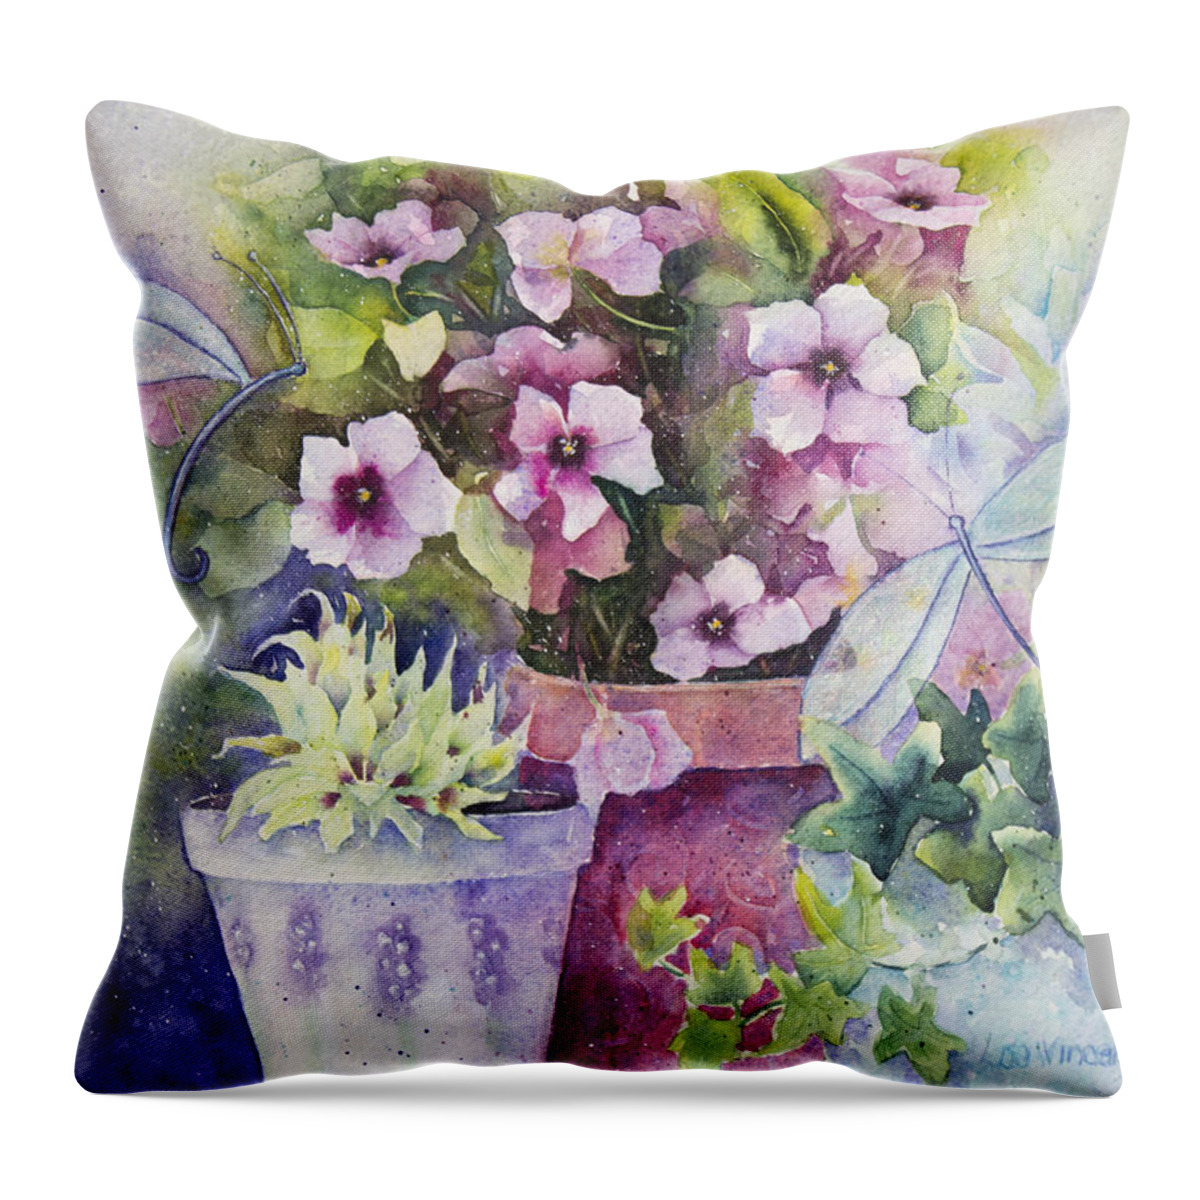 Giclee Throw Pillow featuring the painting Chance Meeting by Lisa Vincent